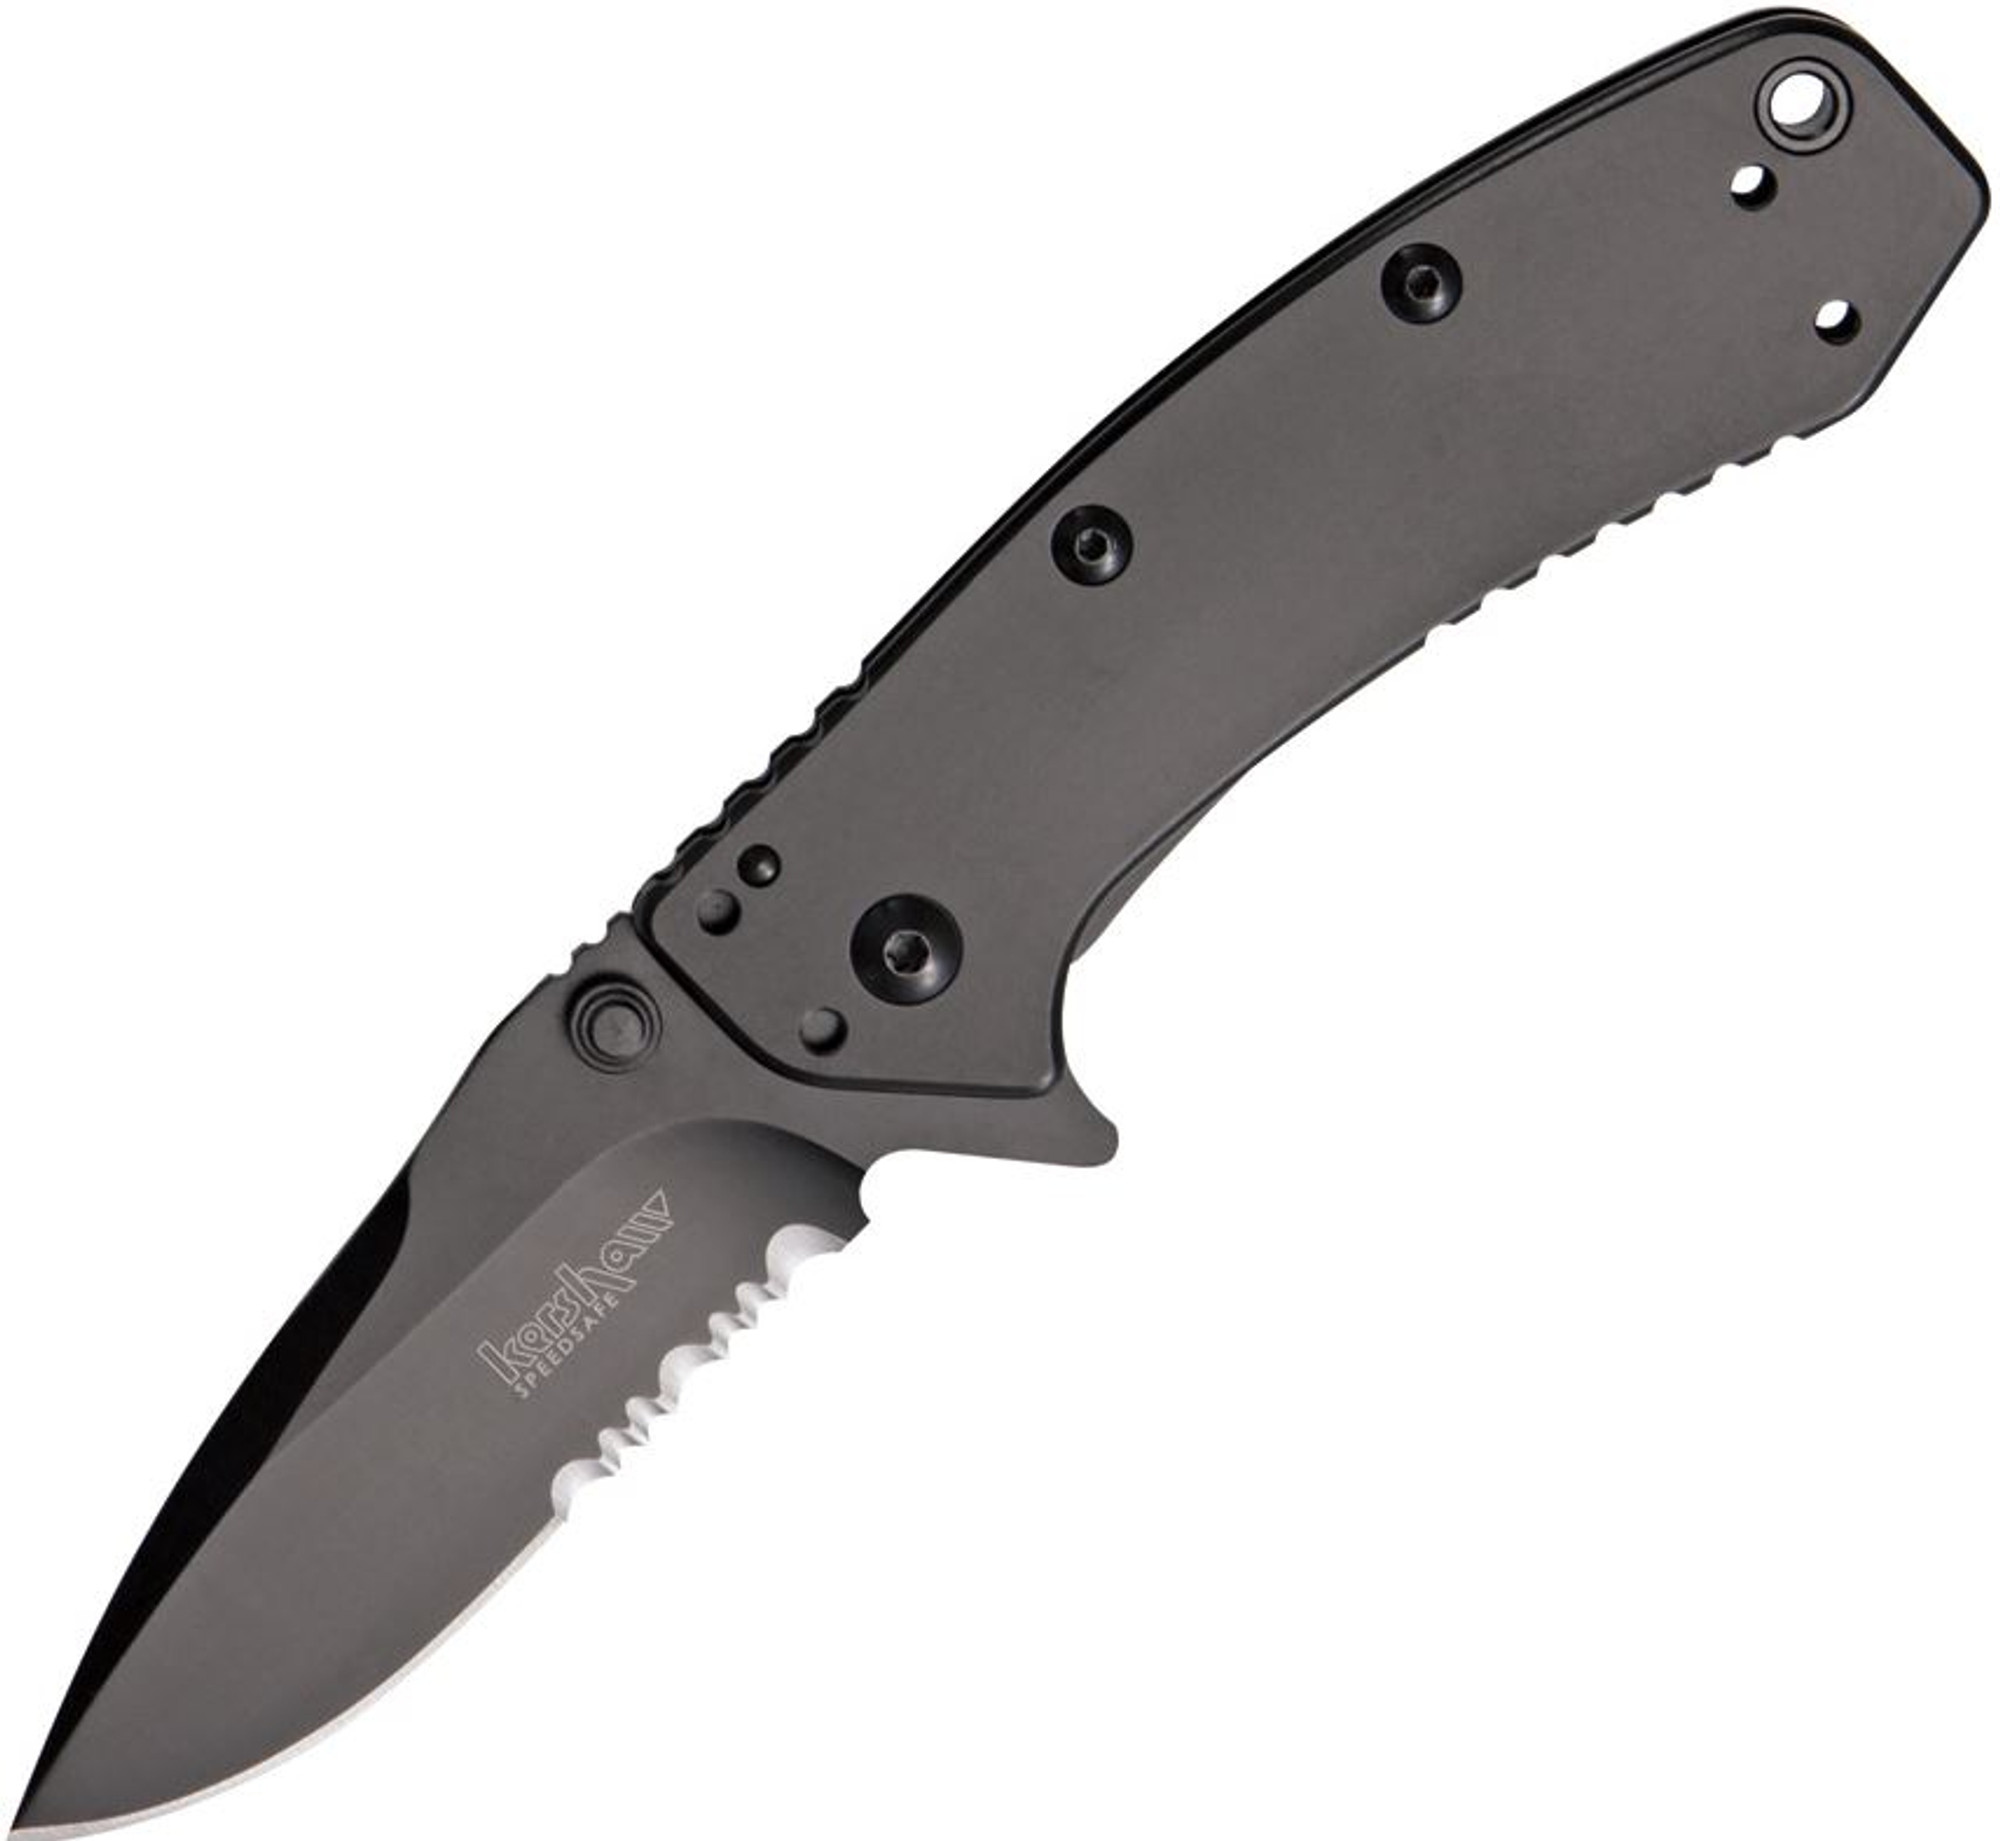 Kershaw 1555BLKST Cryo Black DLC Assisted Opening, Serrated